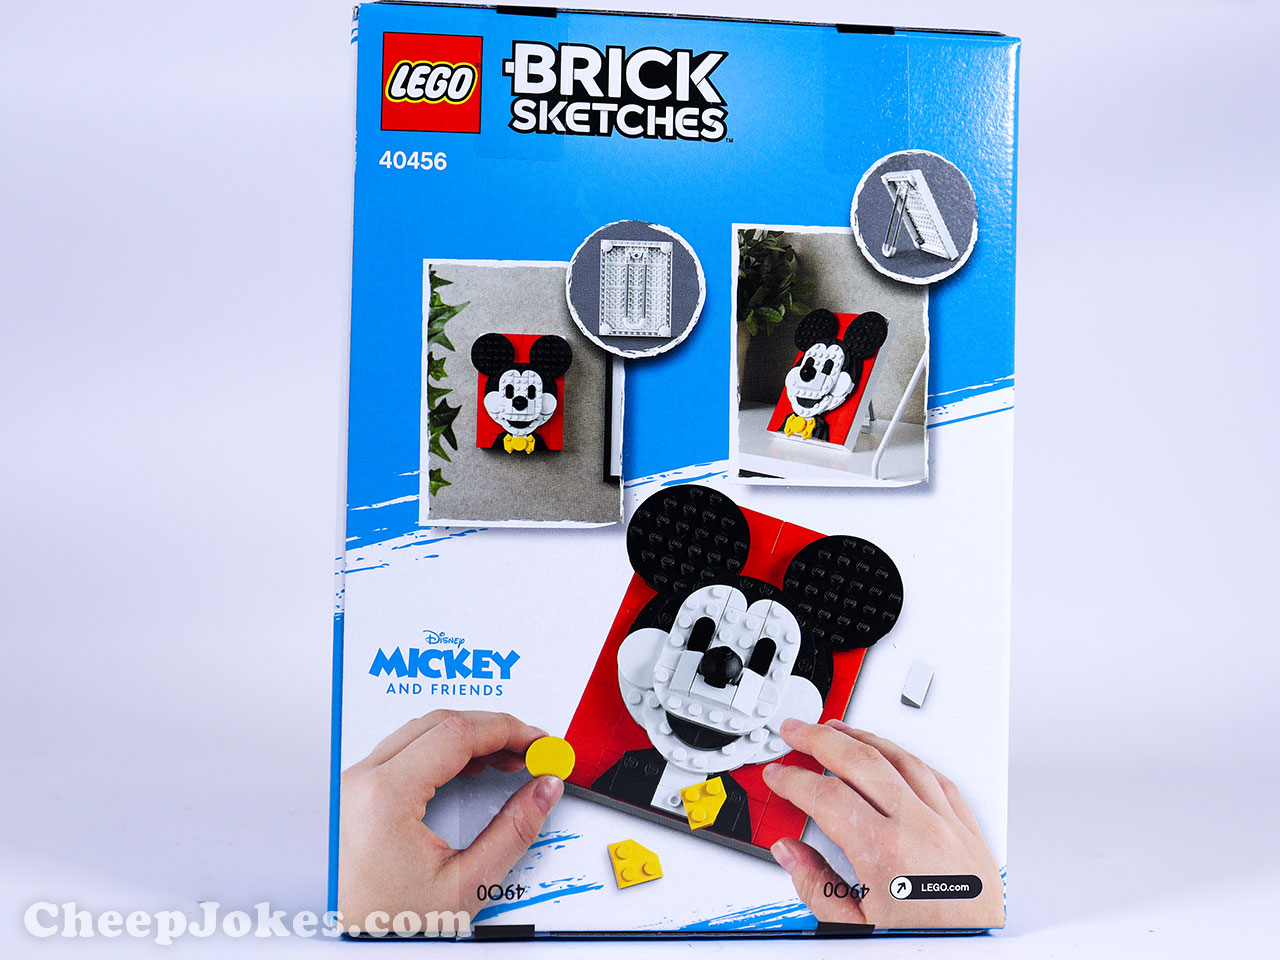 LEGO Brick Sketches -Disney - Mickey & Minnie  Fans of Disney’s iconic characters can build and display their own Mickey & Minnie Mouse illustration with this LEGO® Brick Sketches™ kit. Hang it on the wall using the built-in hook – the 12x16 baseplate holds the LEGO bricks firmly in place – or stand it on a shelf. It’s a perfect gift for birthdays, holidays or other celebrations and an impressive addition to any collection of LEGO Brick Sketches character portraits.